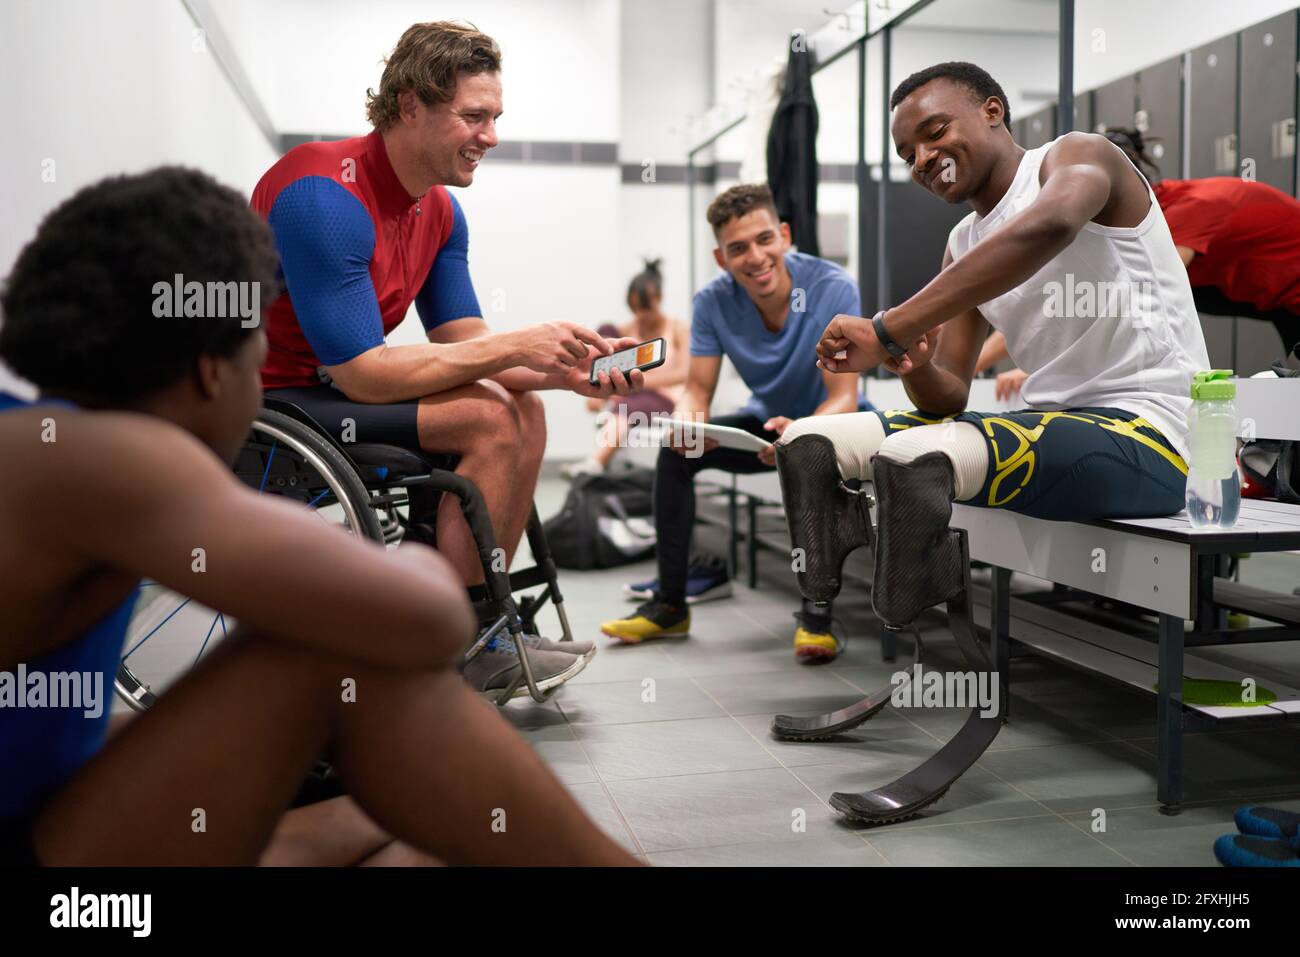 Amputee and wheelchair athletes in locker room Stock Photo